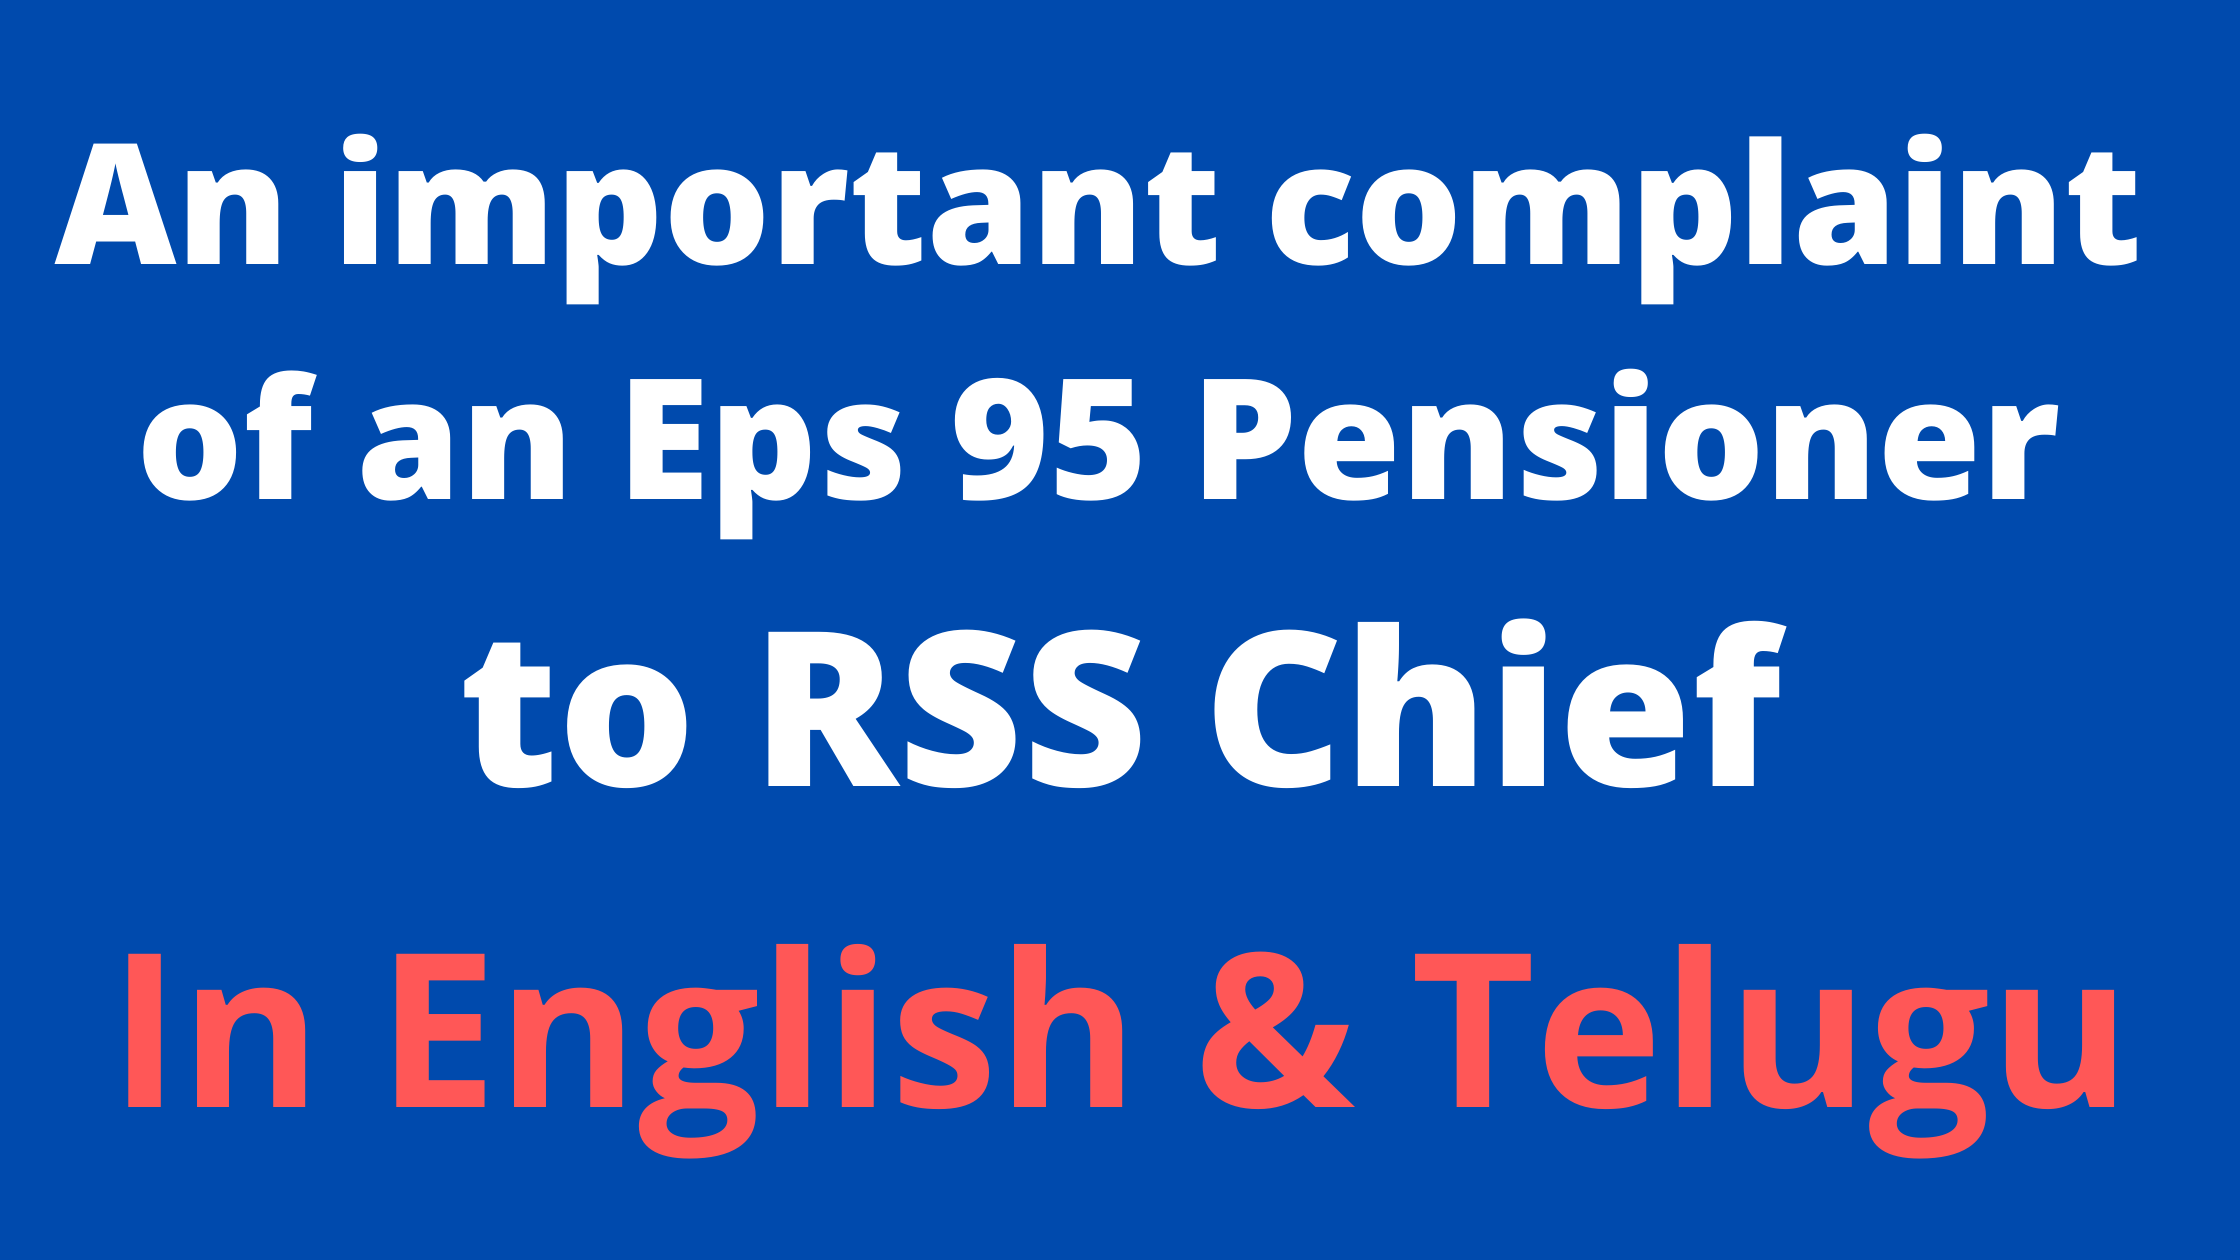 An important complaint of an Eps 95 Pensioner to RSS Chief